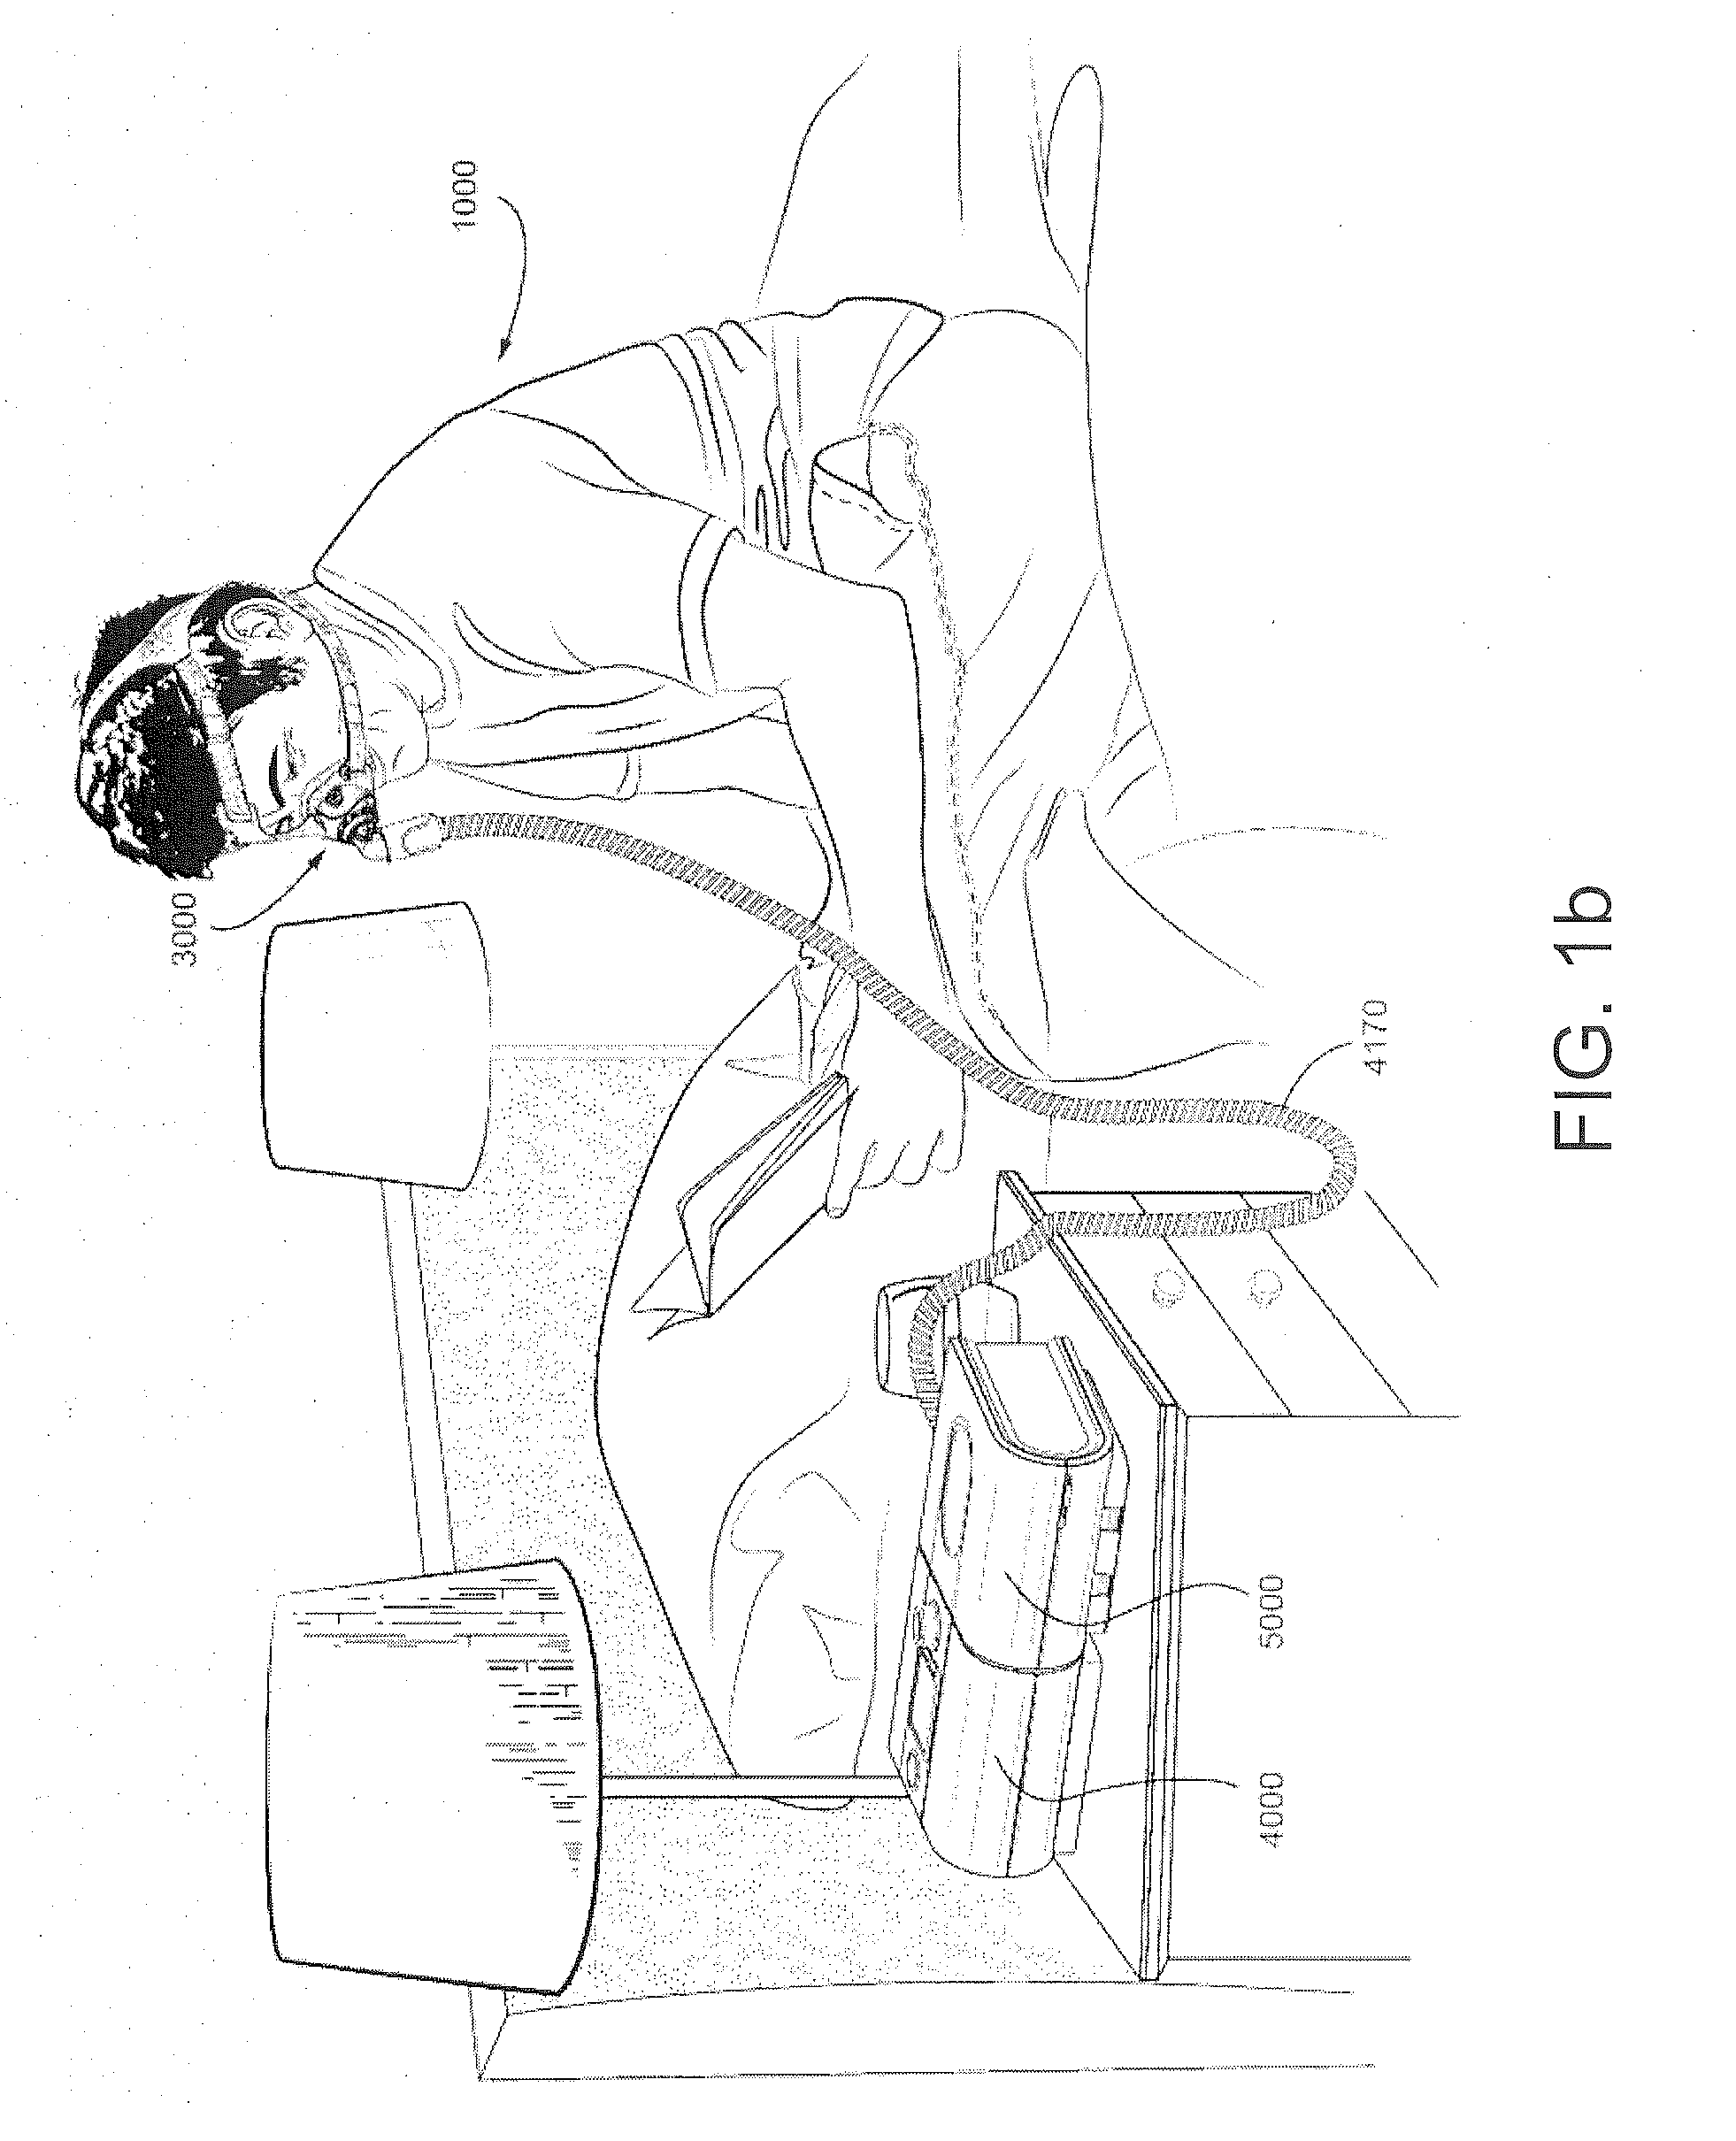 System and method for determining sleep stage